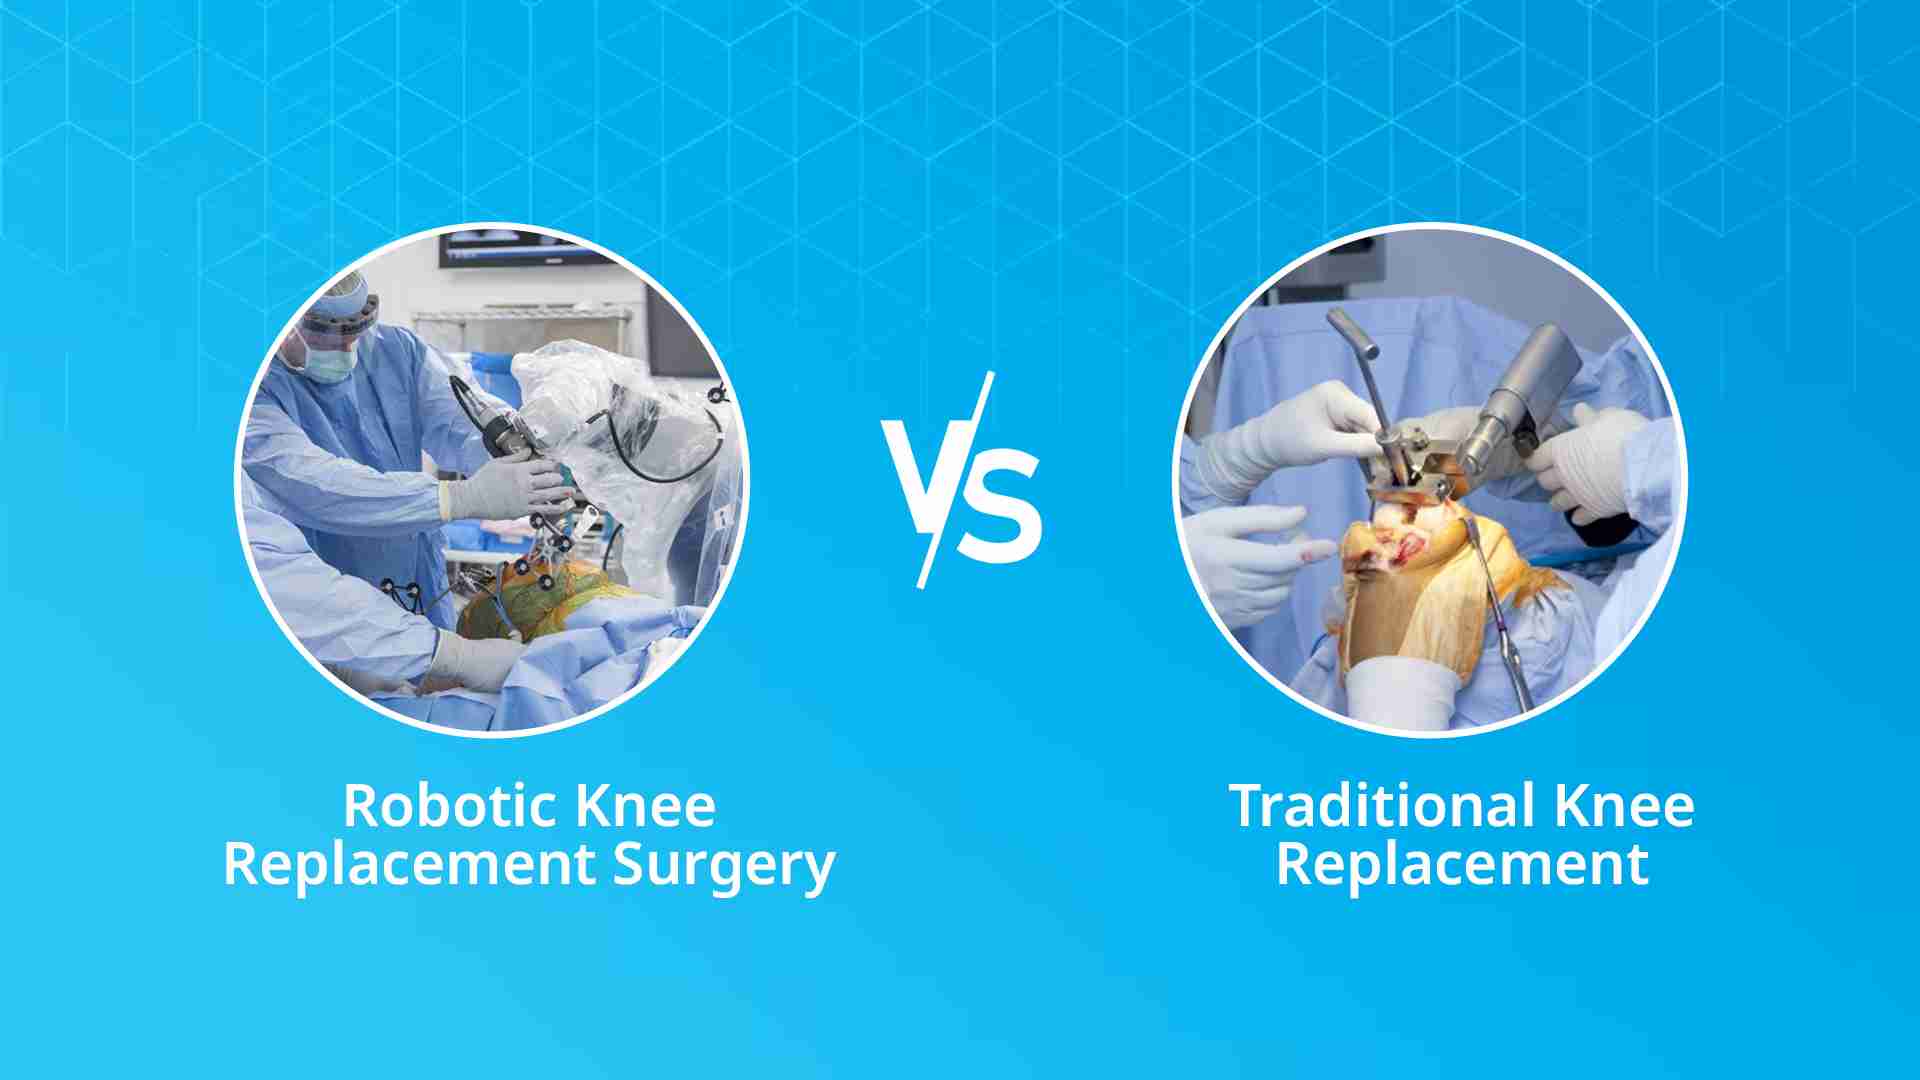 Robotic Knee Replacement vs. Traditional Knee Replacement